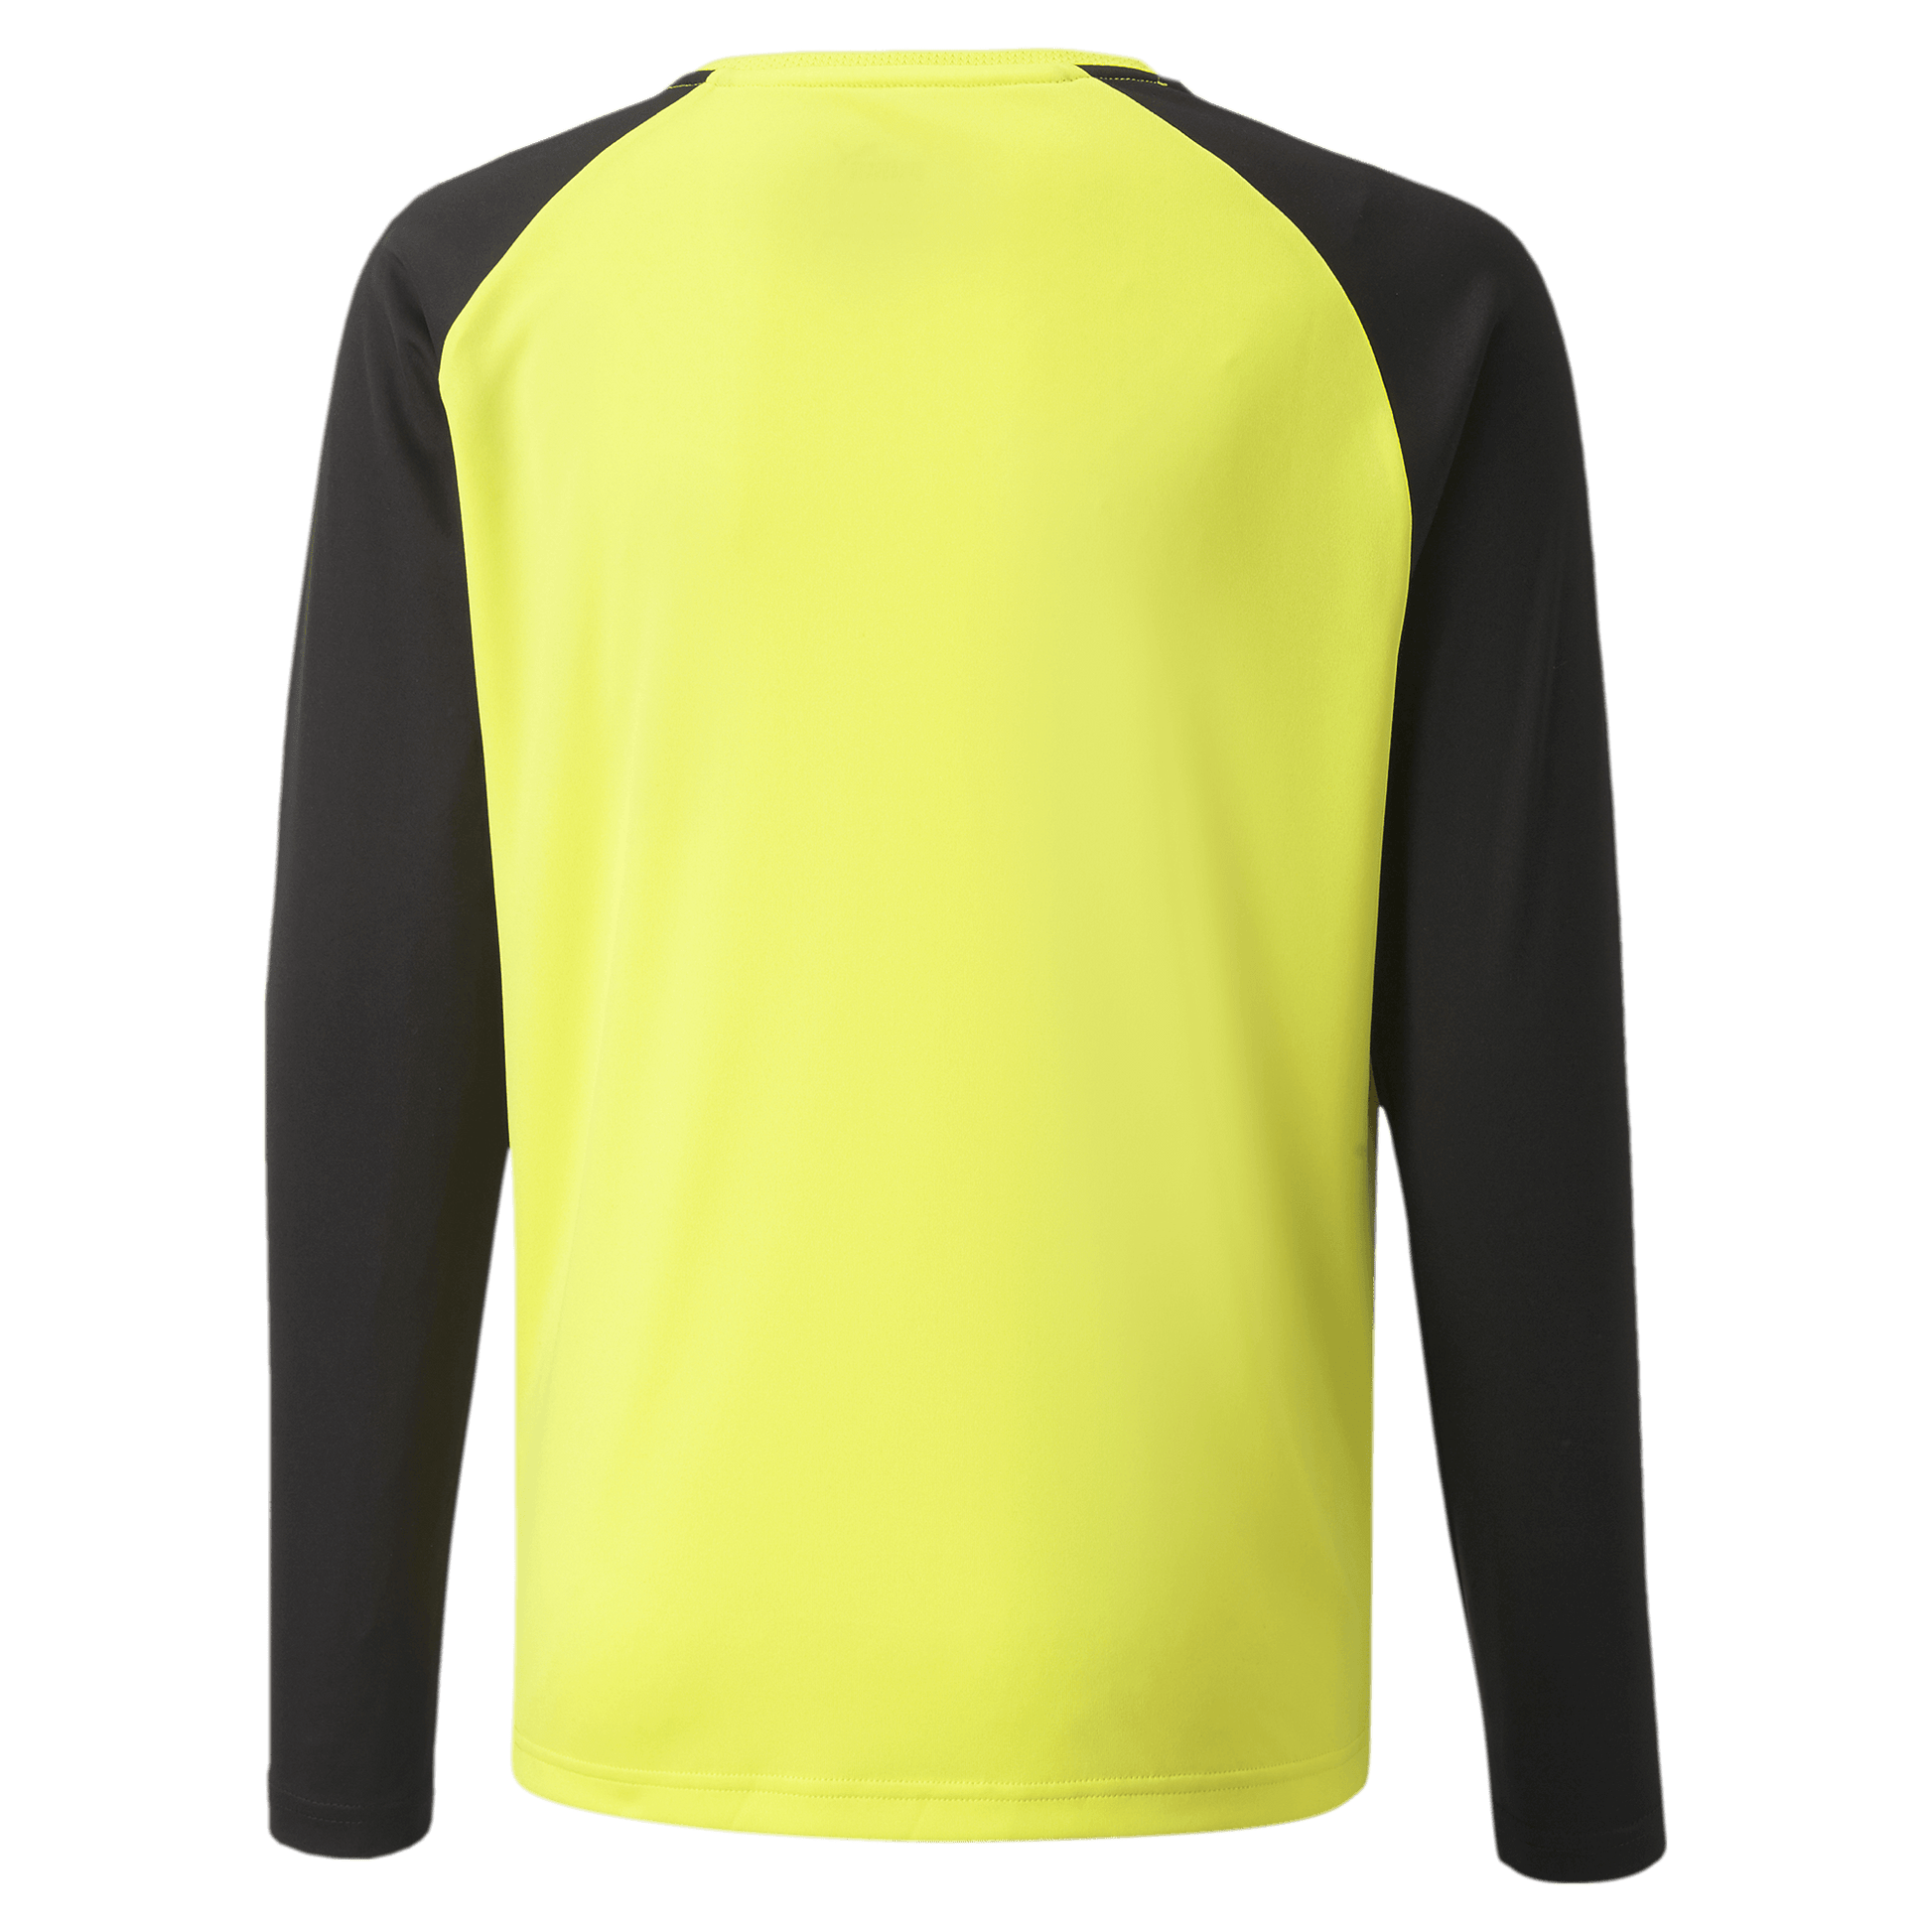 Puma Team Pacer GK Jersey Fluo Yellow-Black (Back)